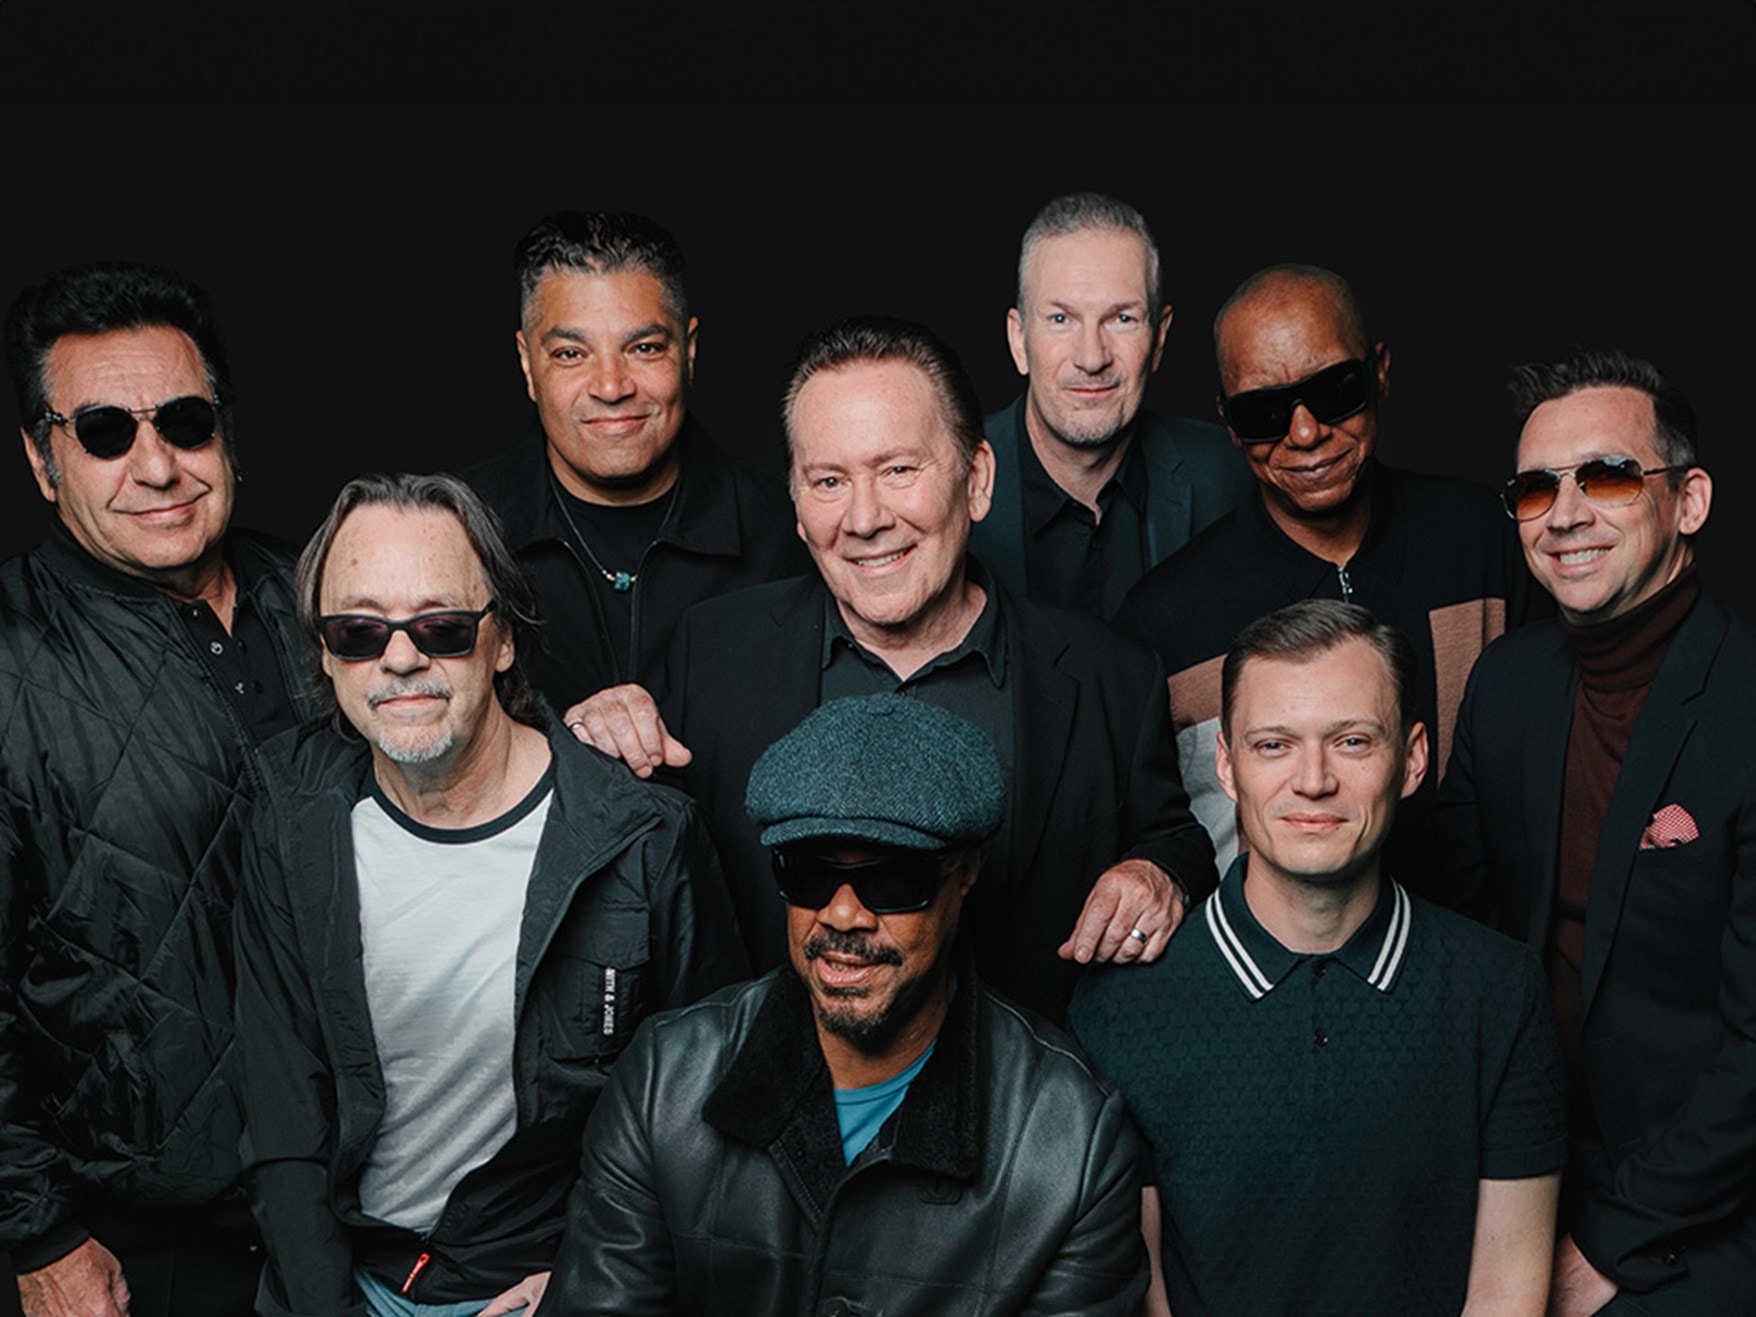 Meet UB40 for an exclusive album signing event